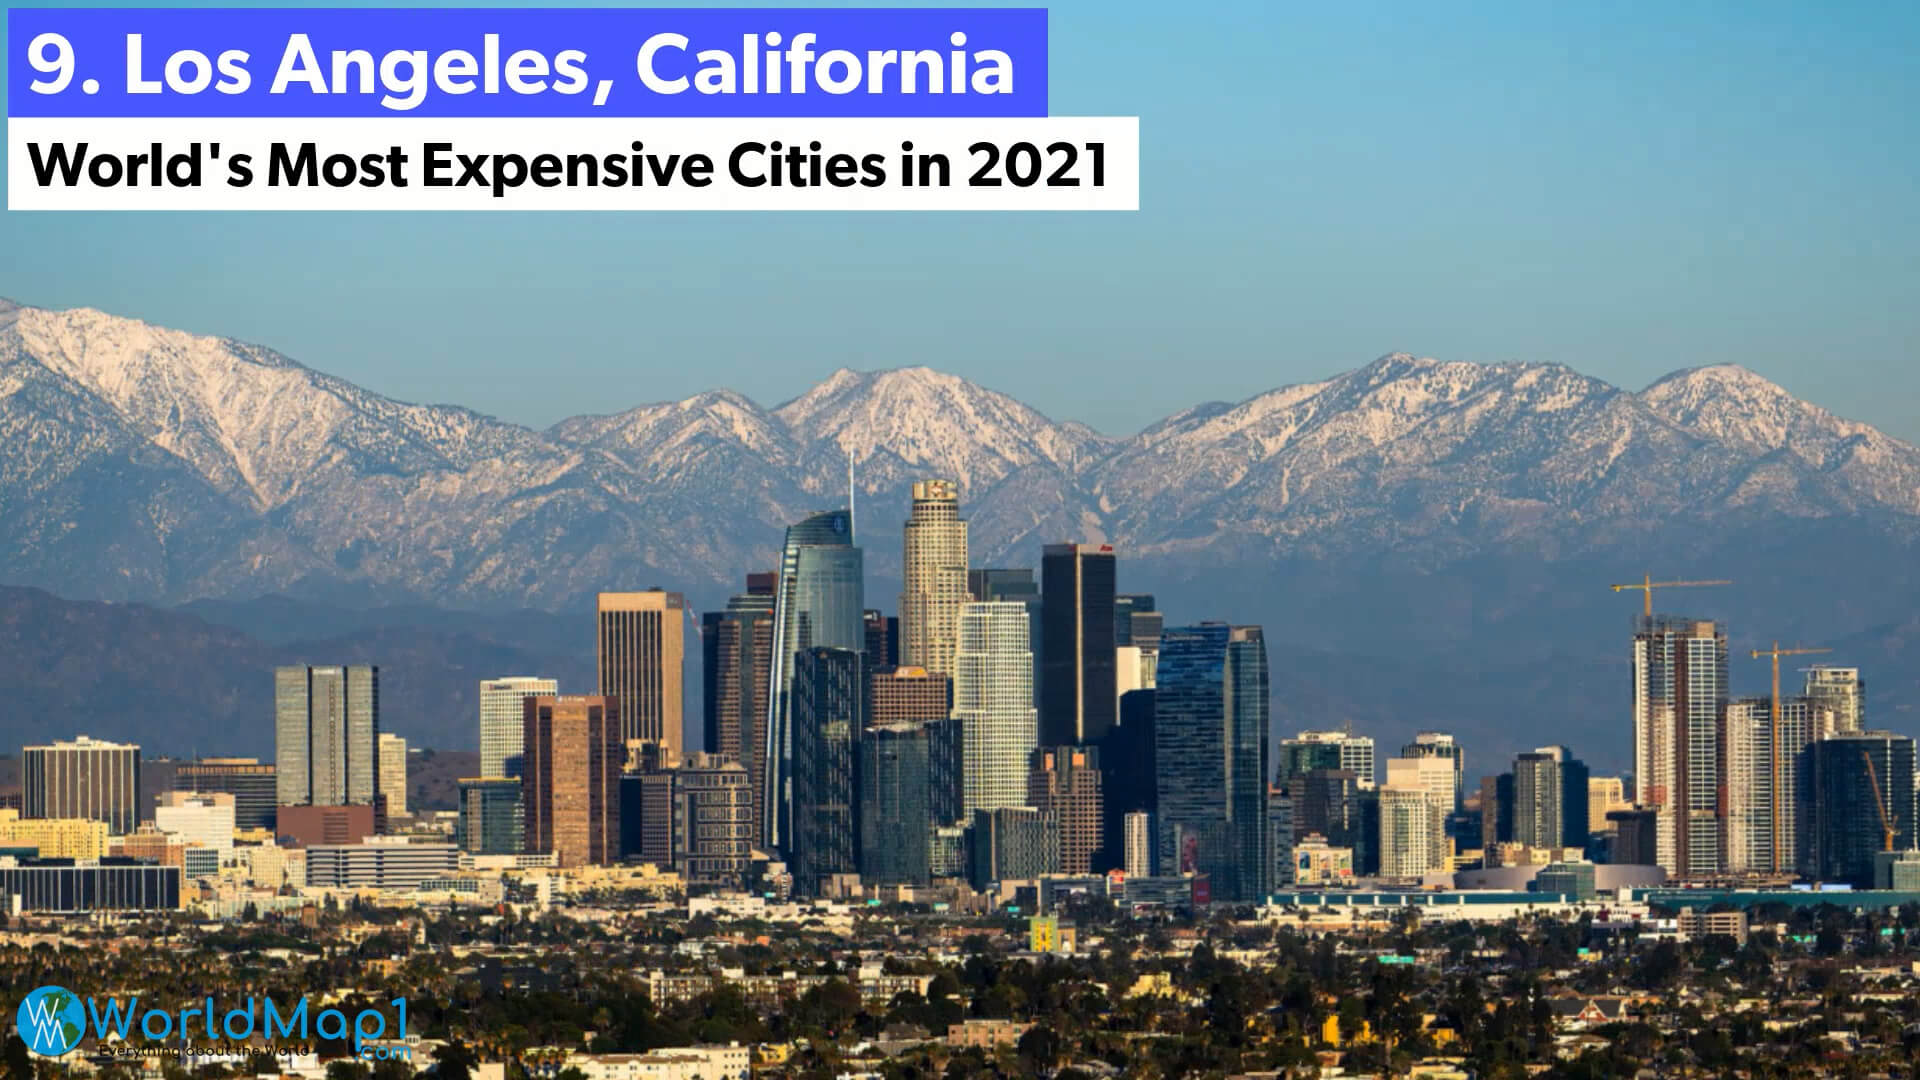 World's Most Expensive Cities - Los Angeles, California - US